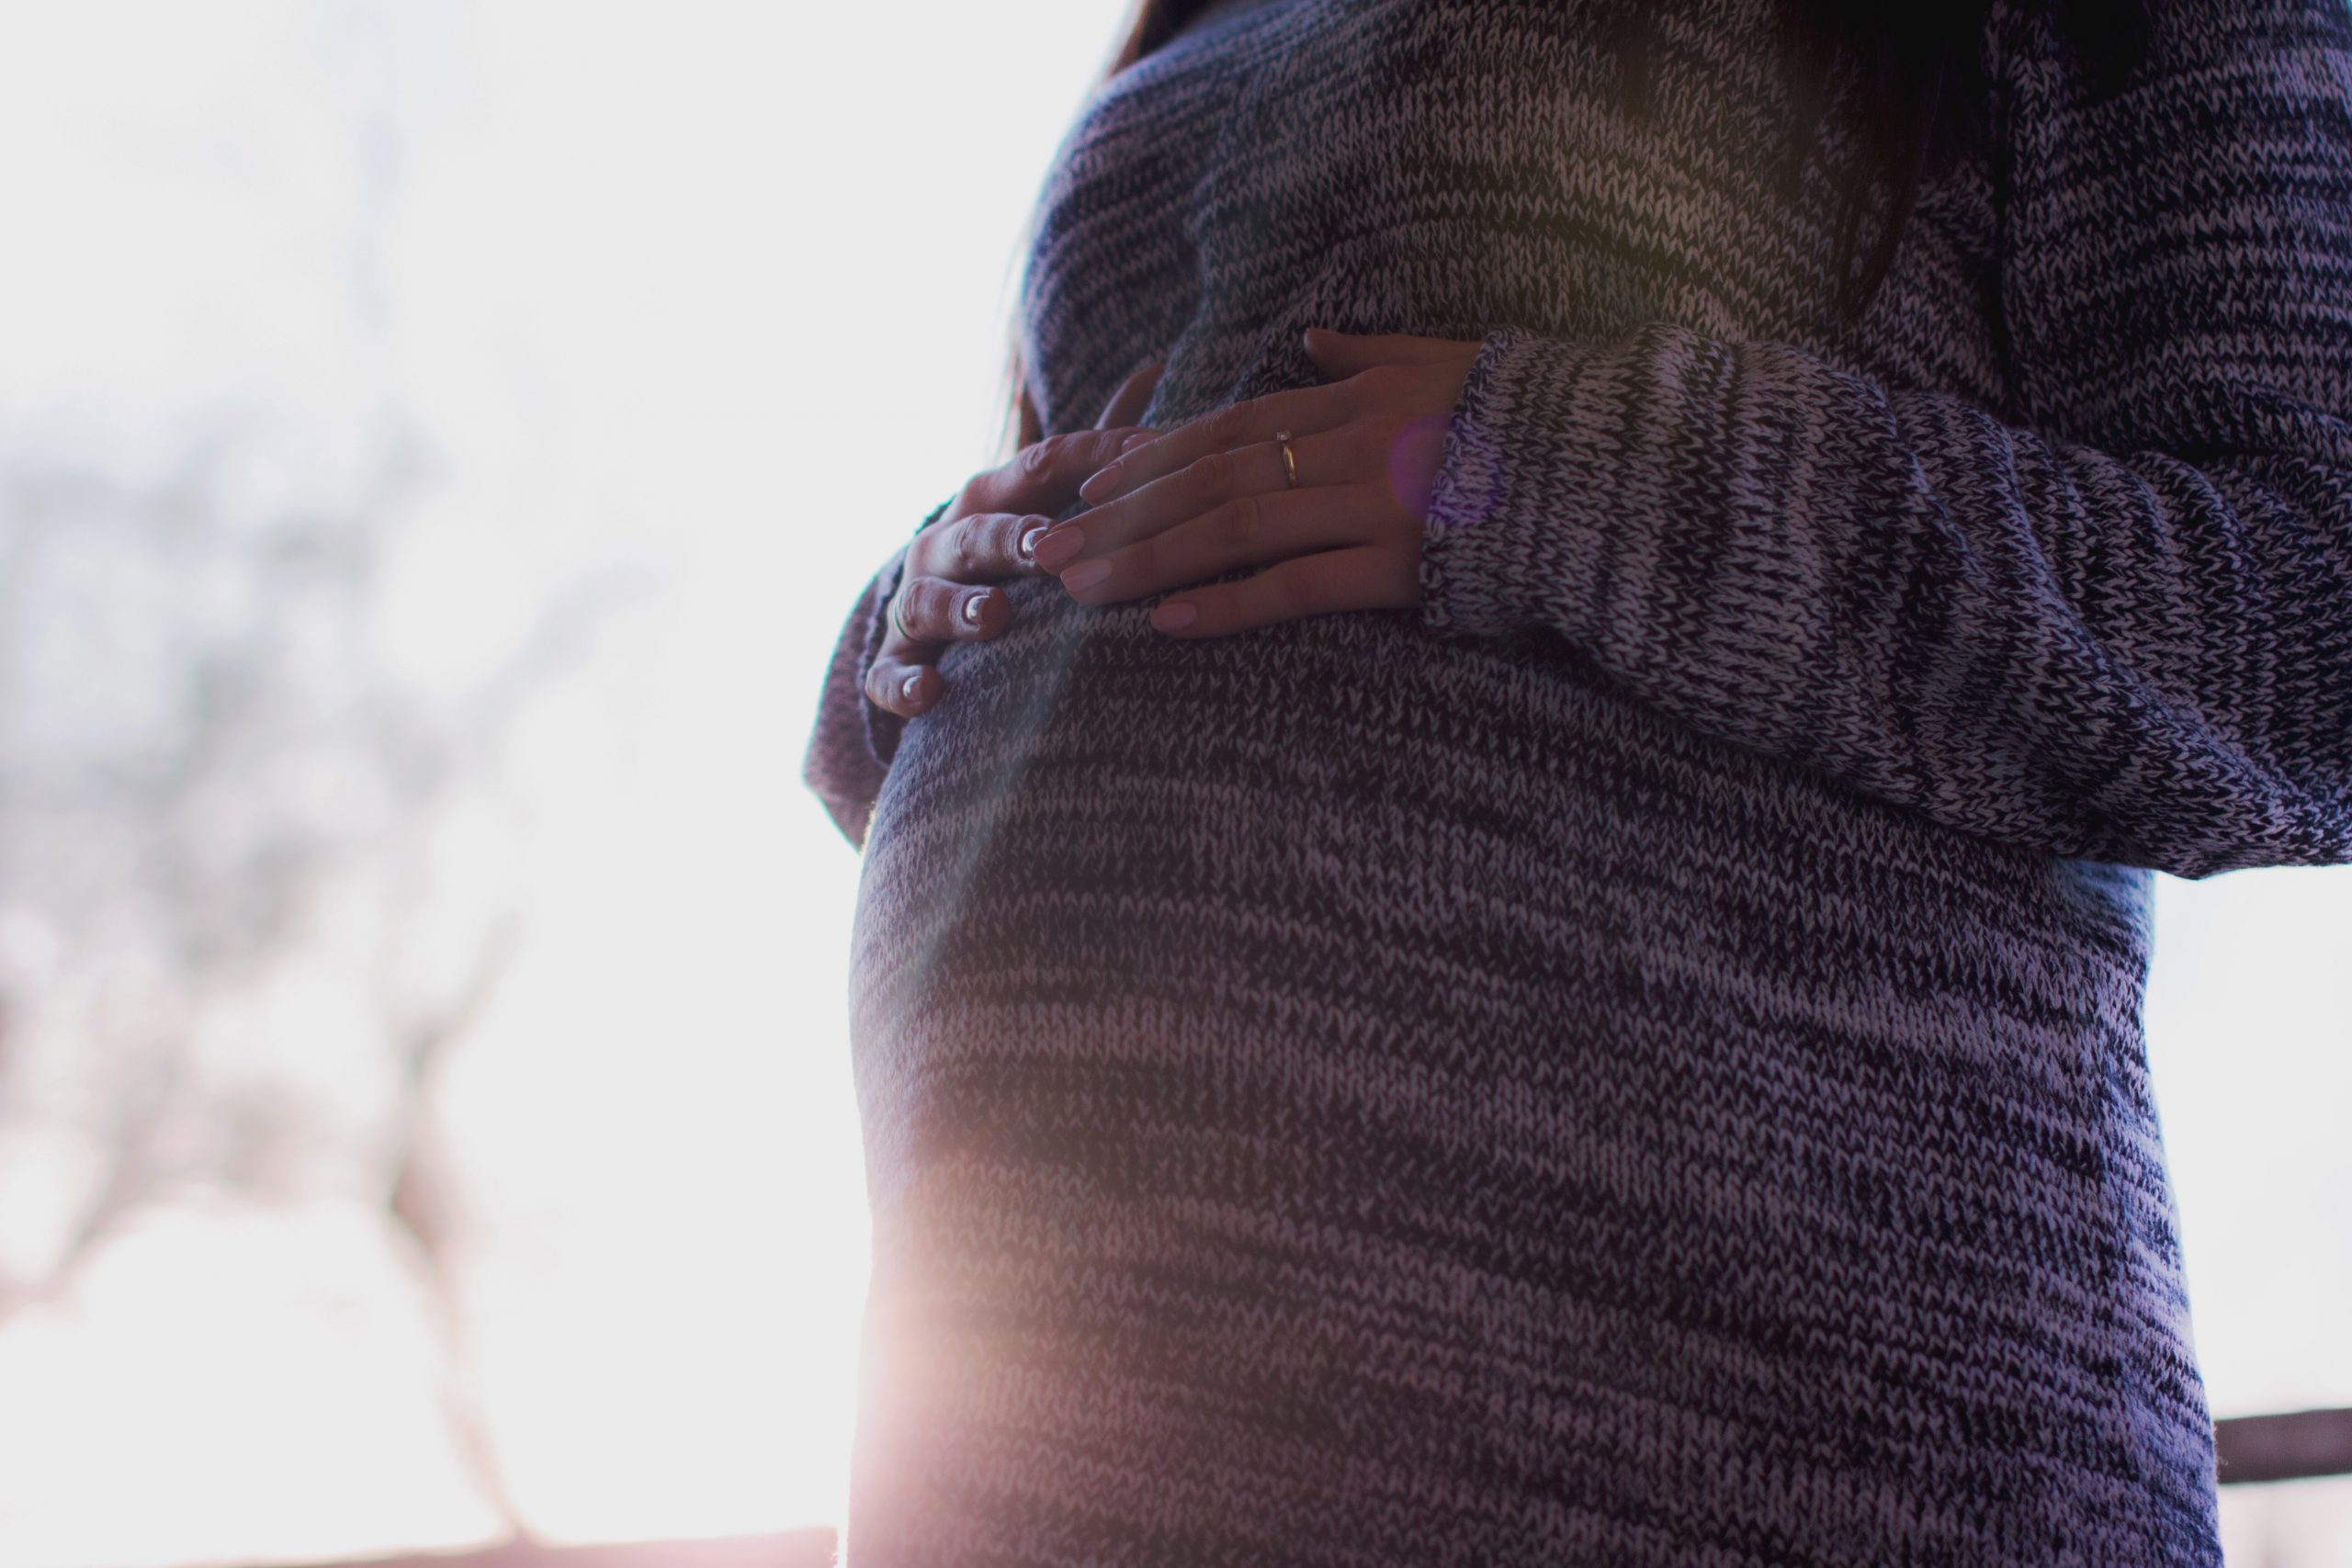 Pregnant belly from unsplash